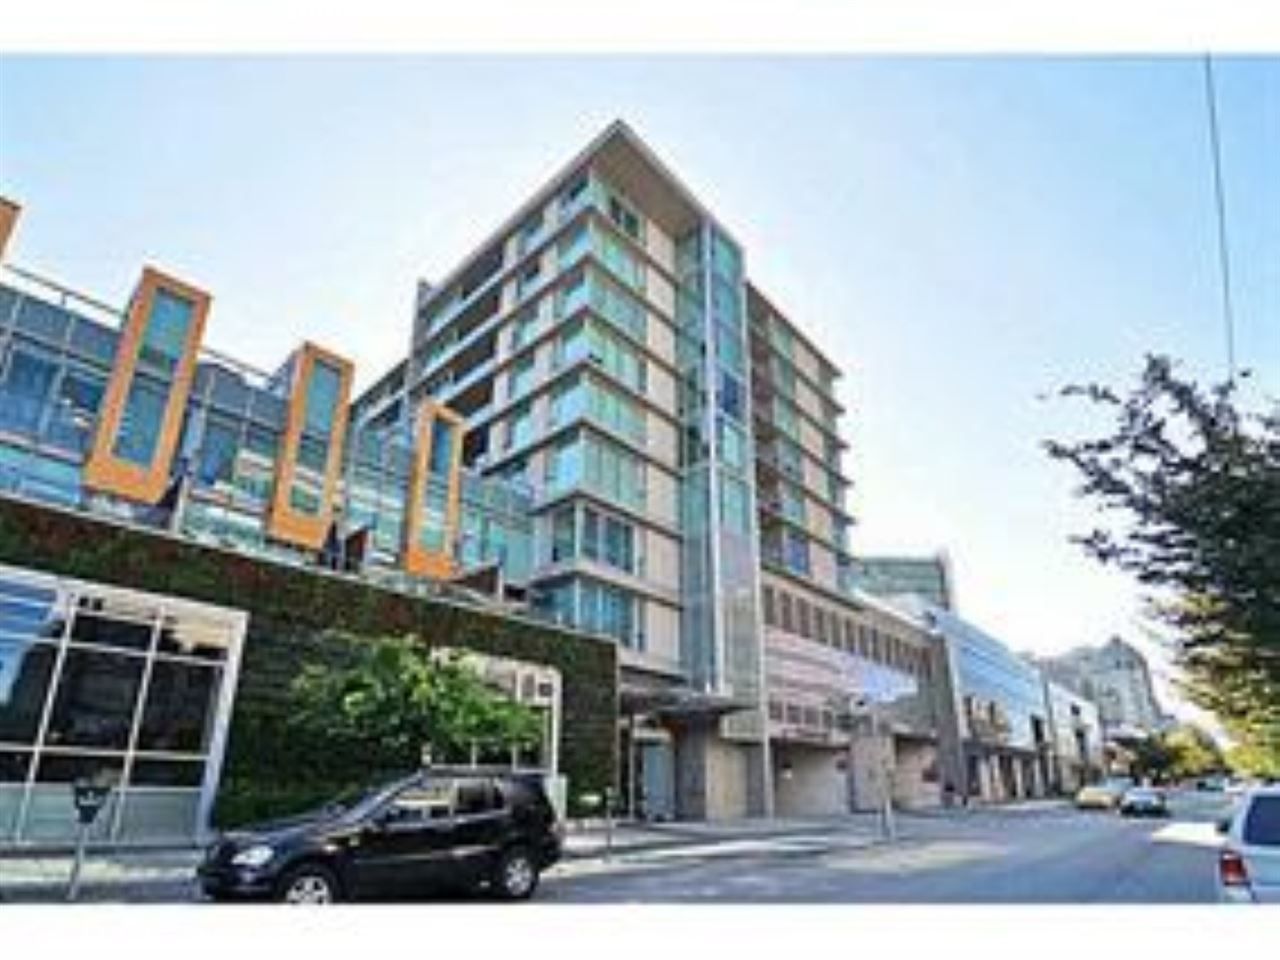 Main Photo: 712 522 W 8TH AVENUE in Vancouver: Fairview VW Condo for sale (Vancouver West)  : MLS®# R2294964